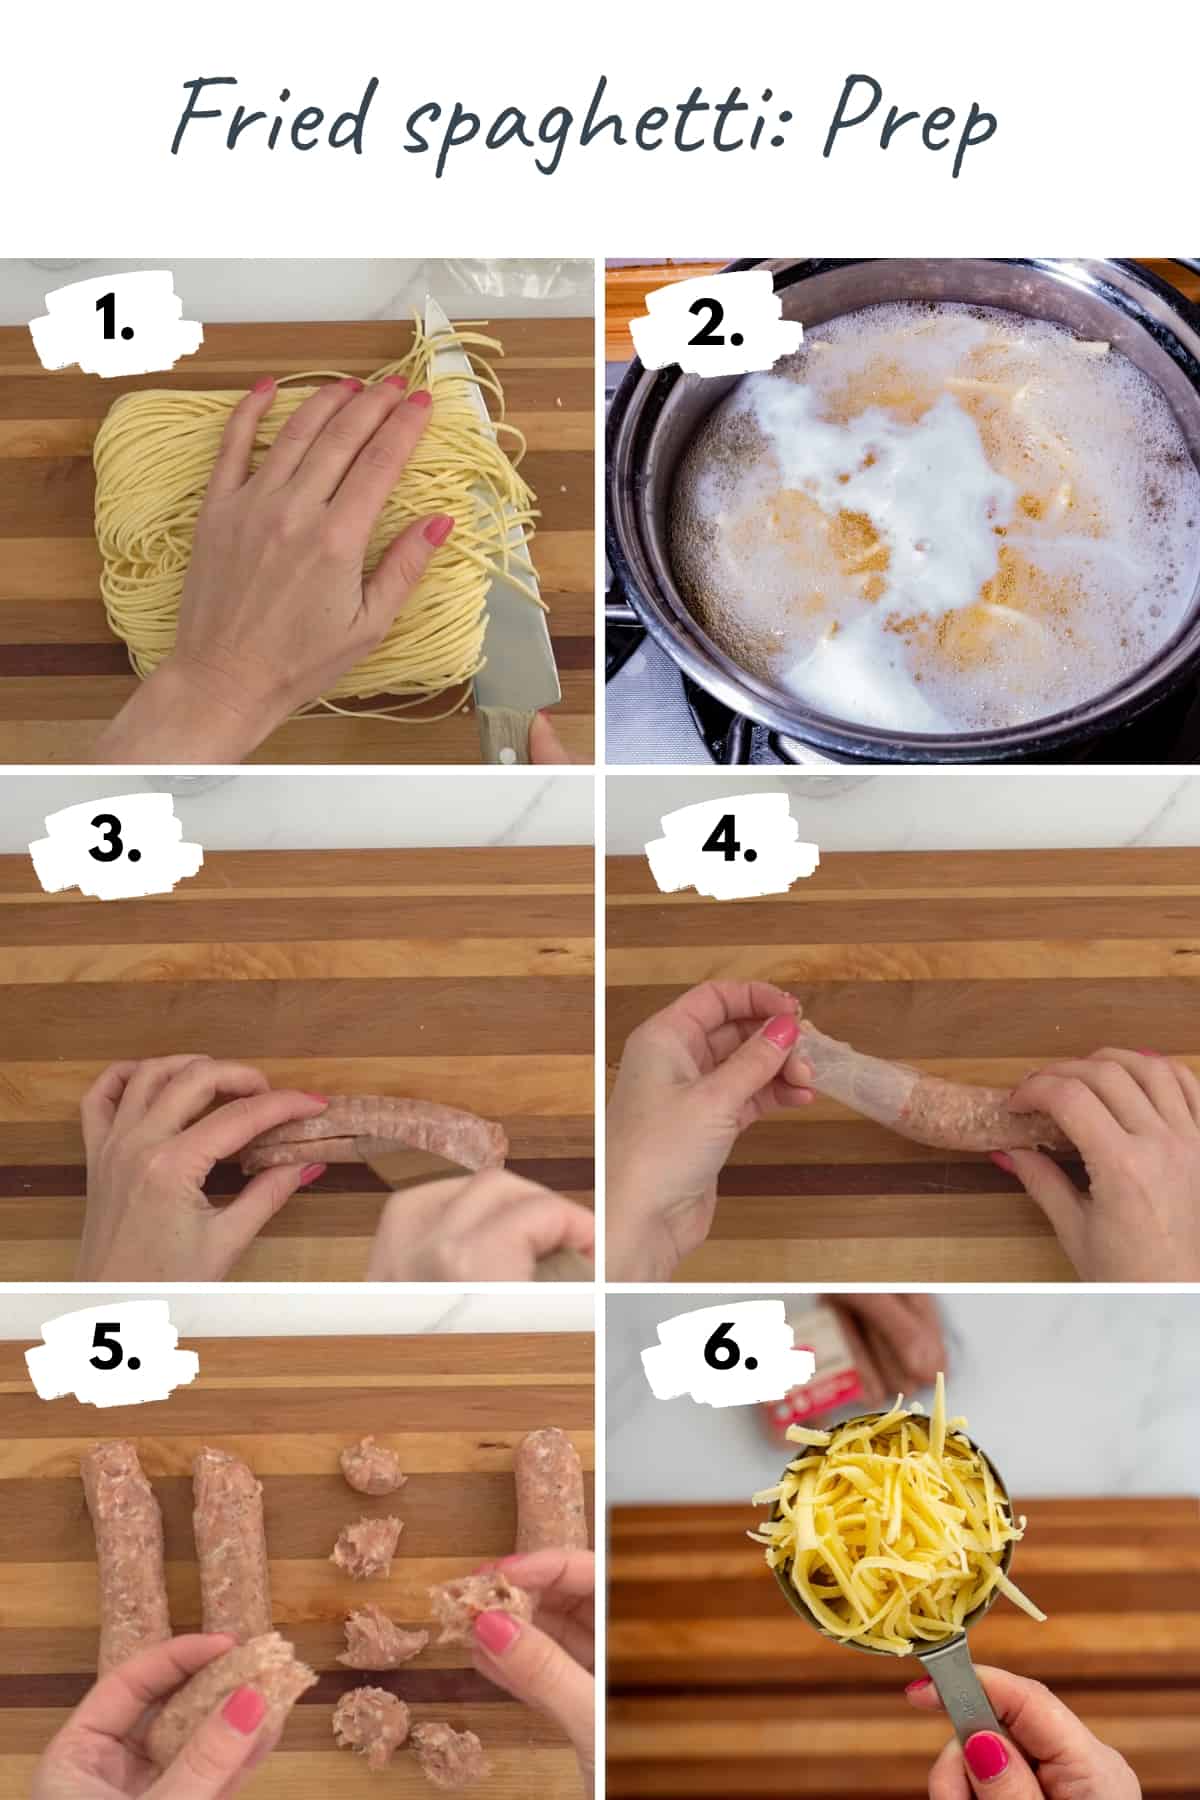 6 photo collage showing the prep steps for fried spaghetti